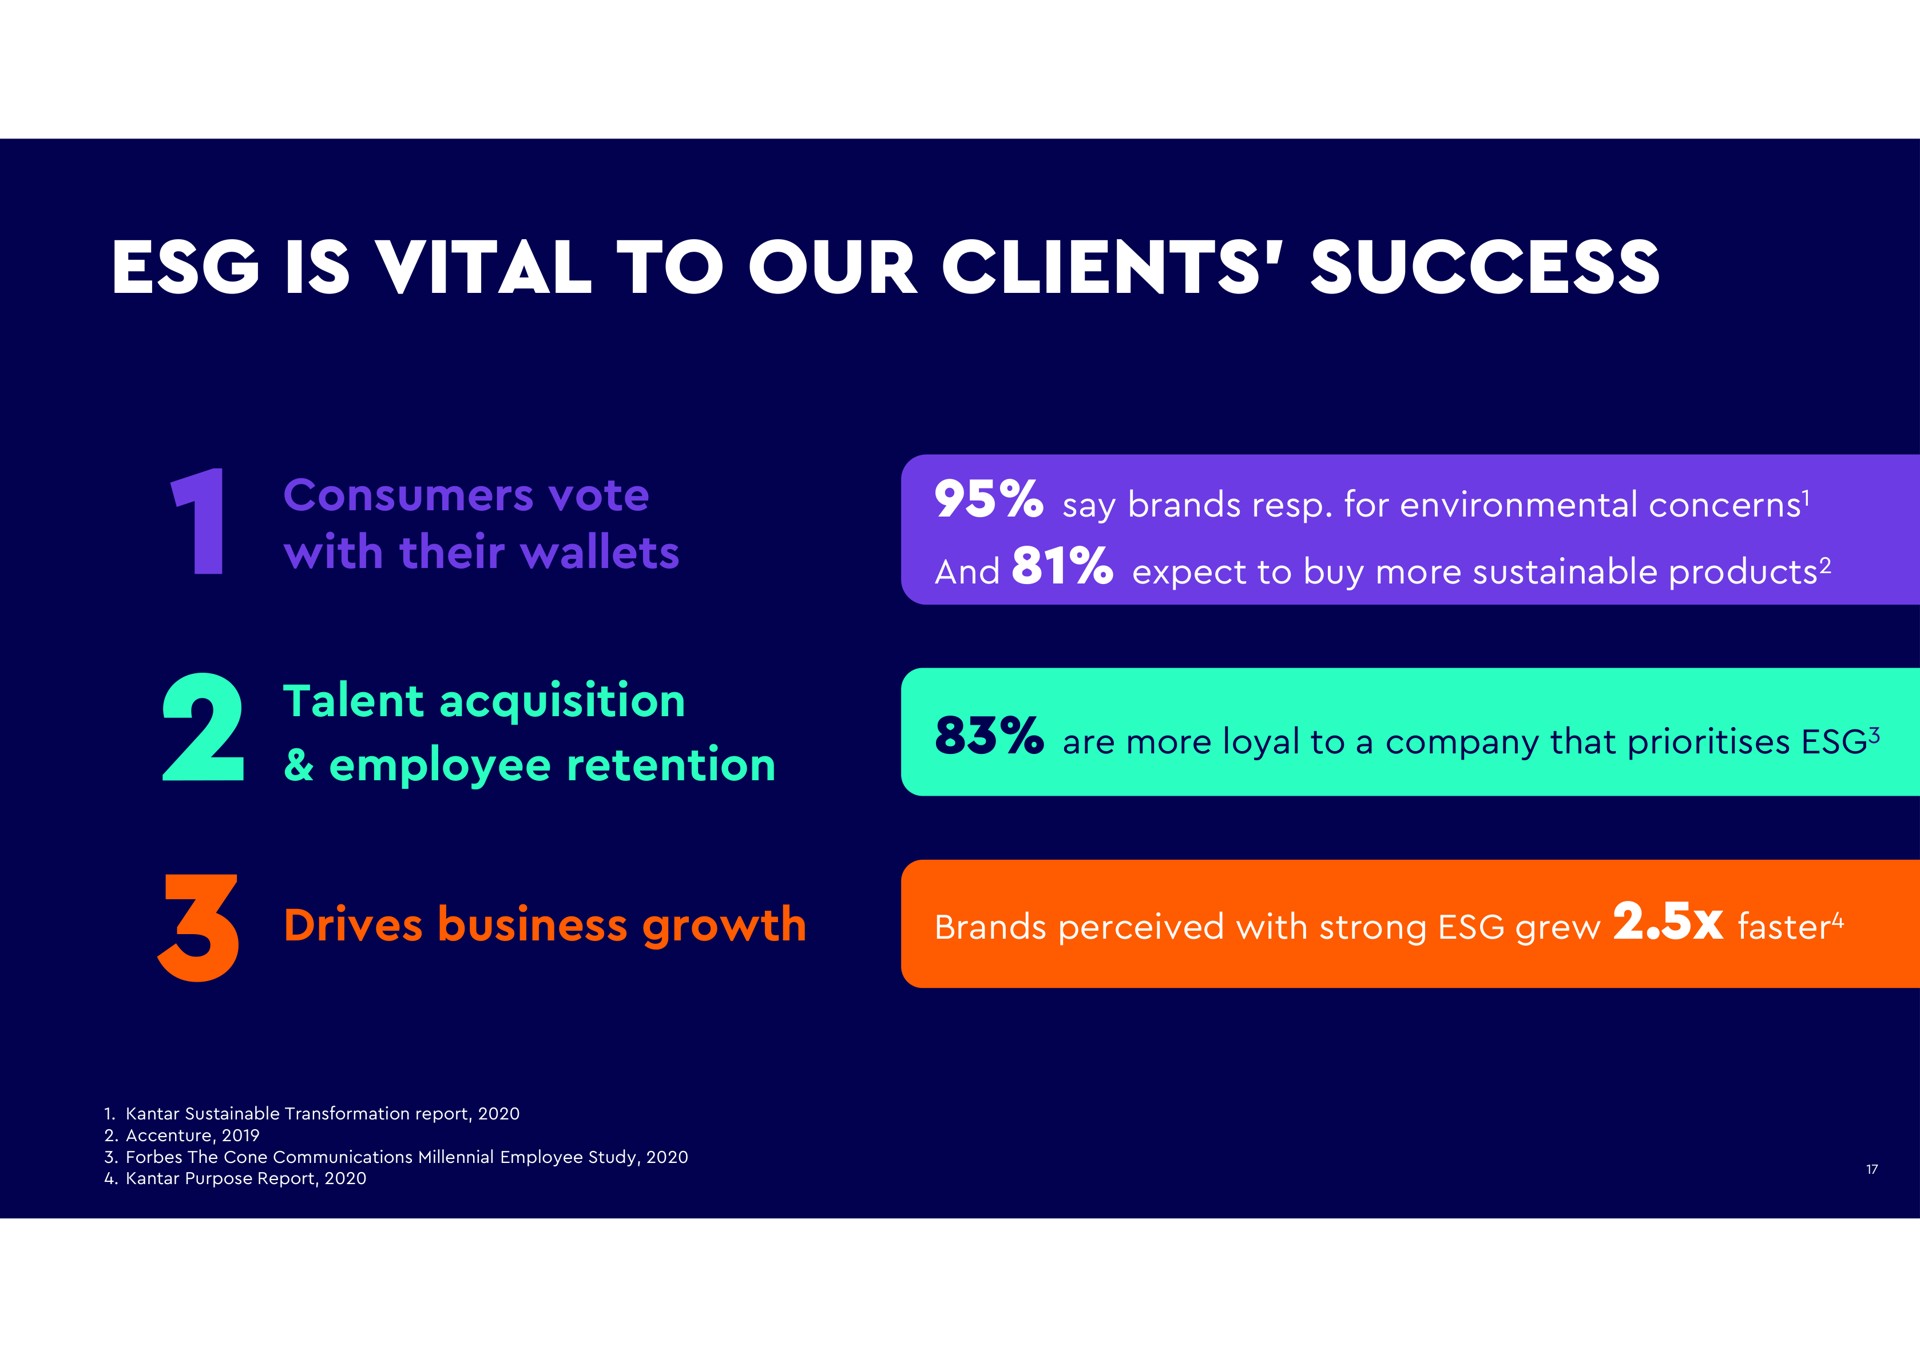 is vital to our clients success say brands resp for environmental concerns and expect buy more sustainable products talent acquisition aspen are more loyal a company that transformation cay tie ais a ort report millennial employee study | WPP